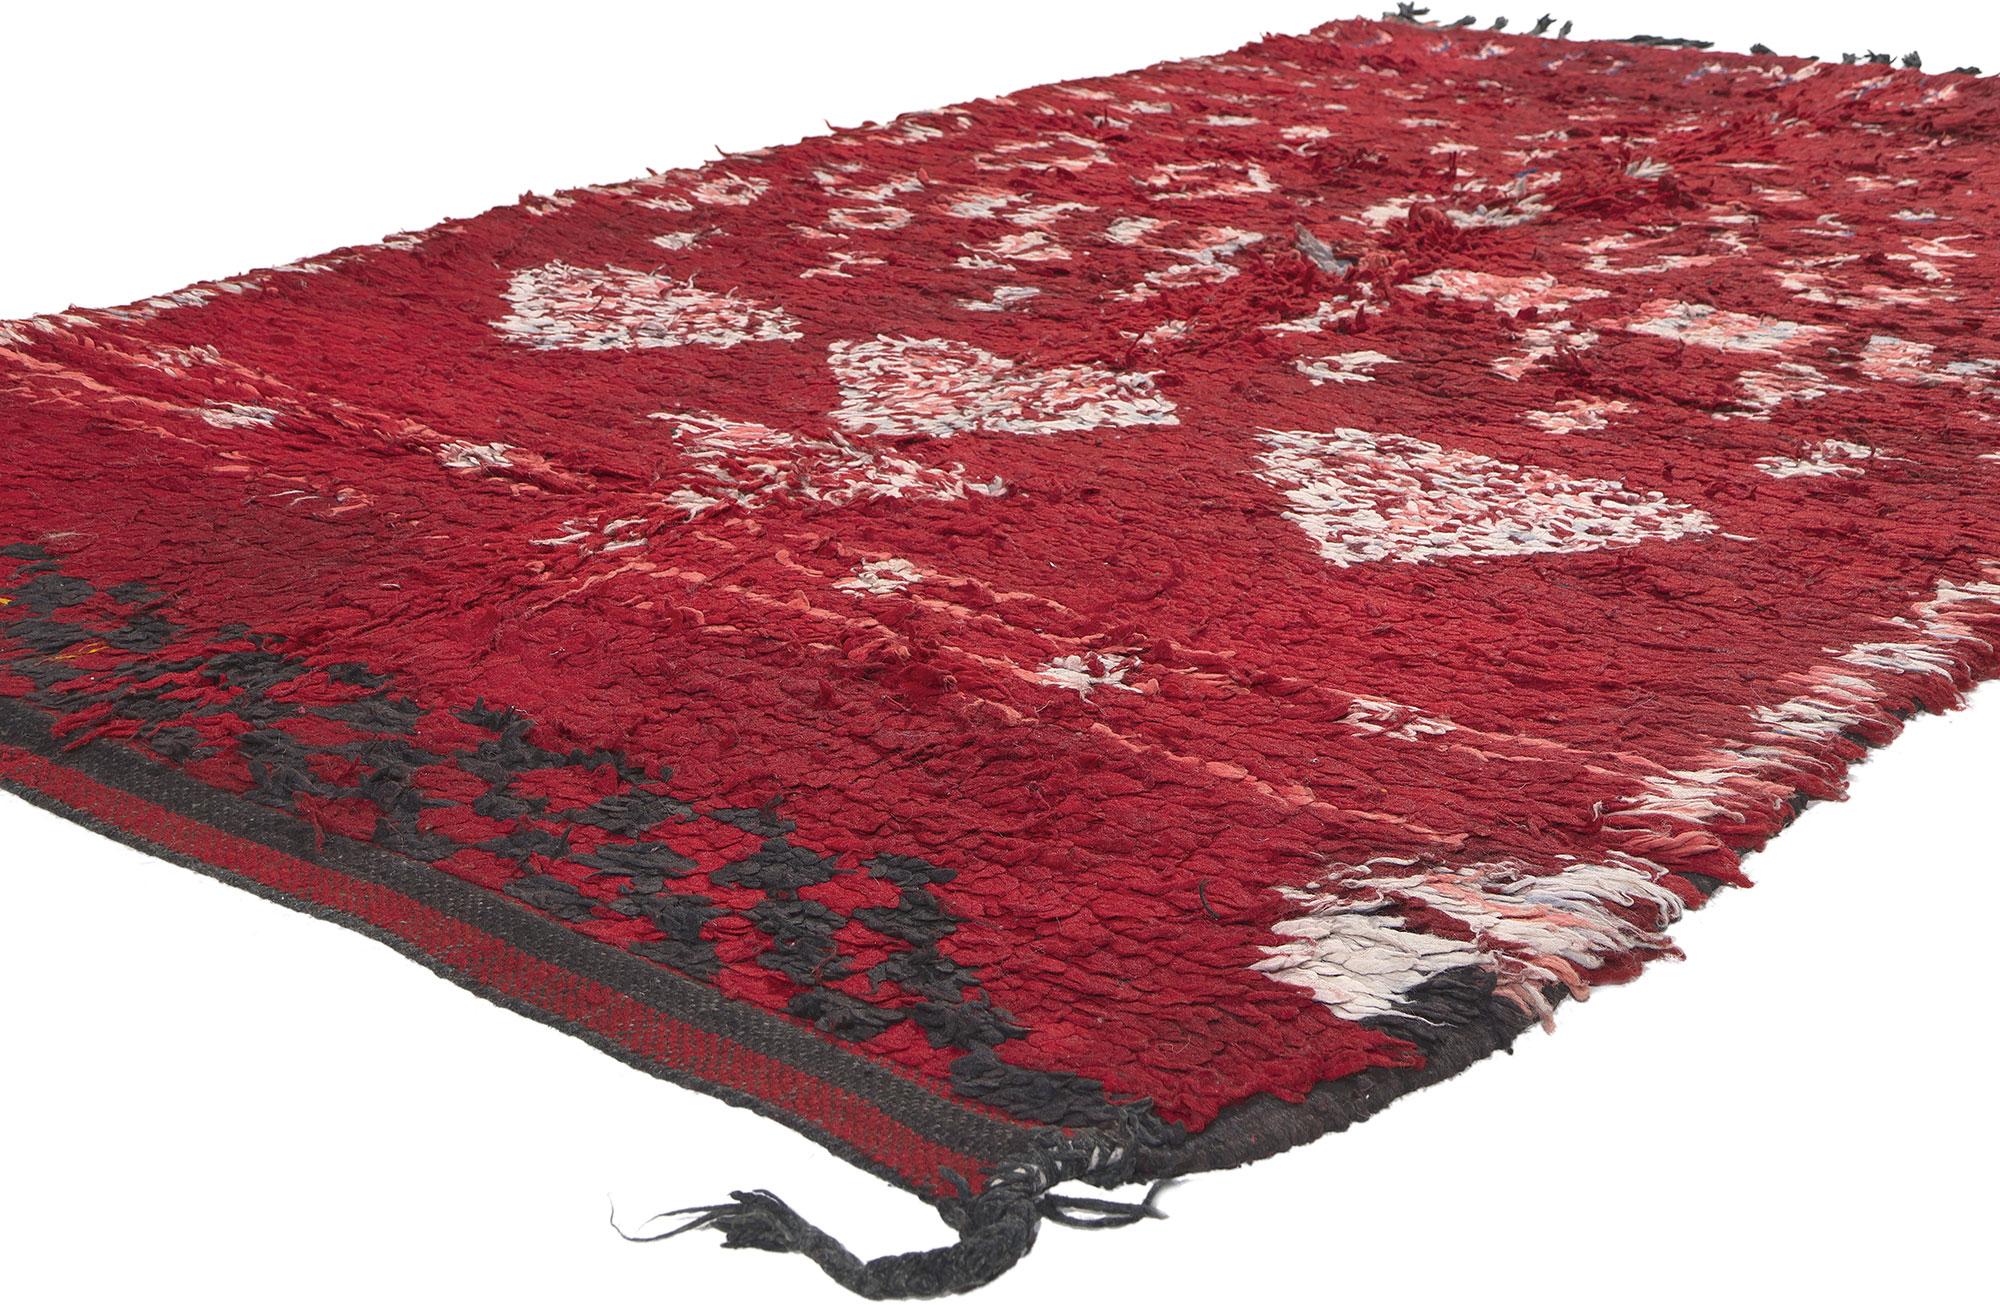 20263 Vintage Talsint Moroccan Rug, 05'02 x 09'02. Delight in the craftsmanship of this hand-knotted wool vintage Talsint Moroccan rug, originating from the Figuig region in northeast Morocco, also recognized as Aït Bou Ichaouen. Unfurling as a